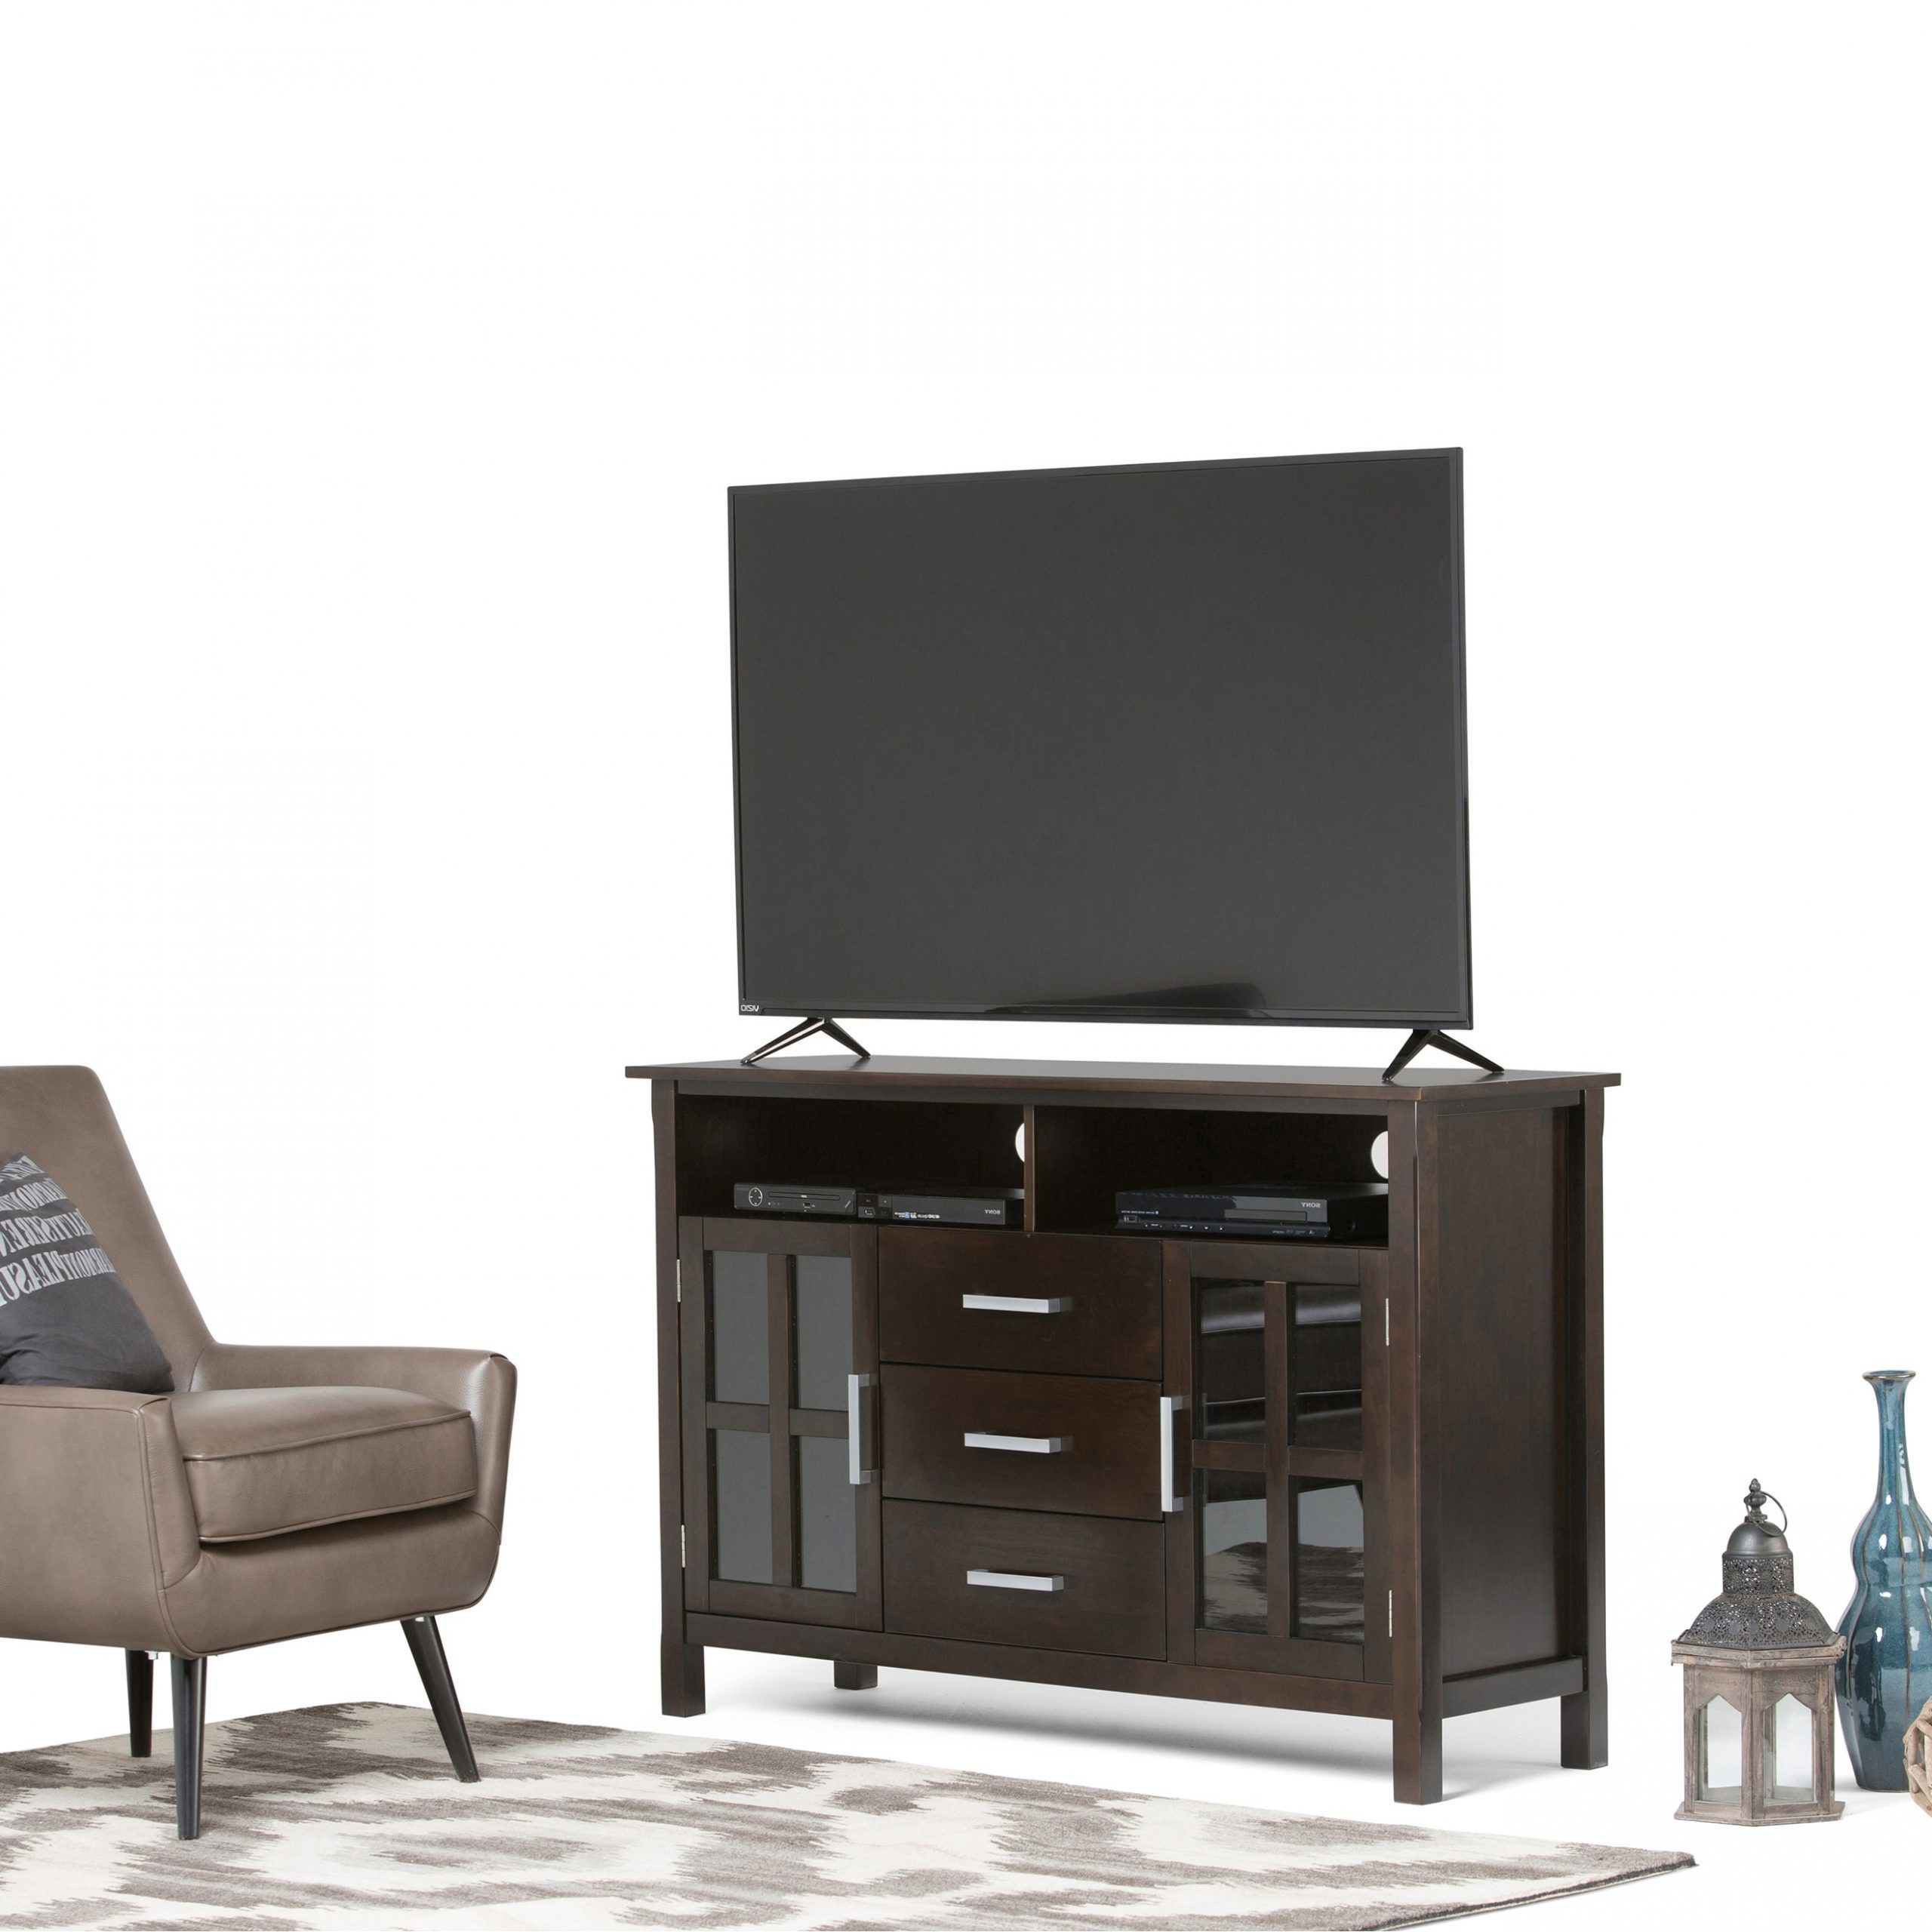 Recent Sahika Tv Stands For Tvs Up To 55" Regarding Wyndenhall Waterloo Solid Wood 53 Inch Wide Contemporary (View 3 of 25)